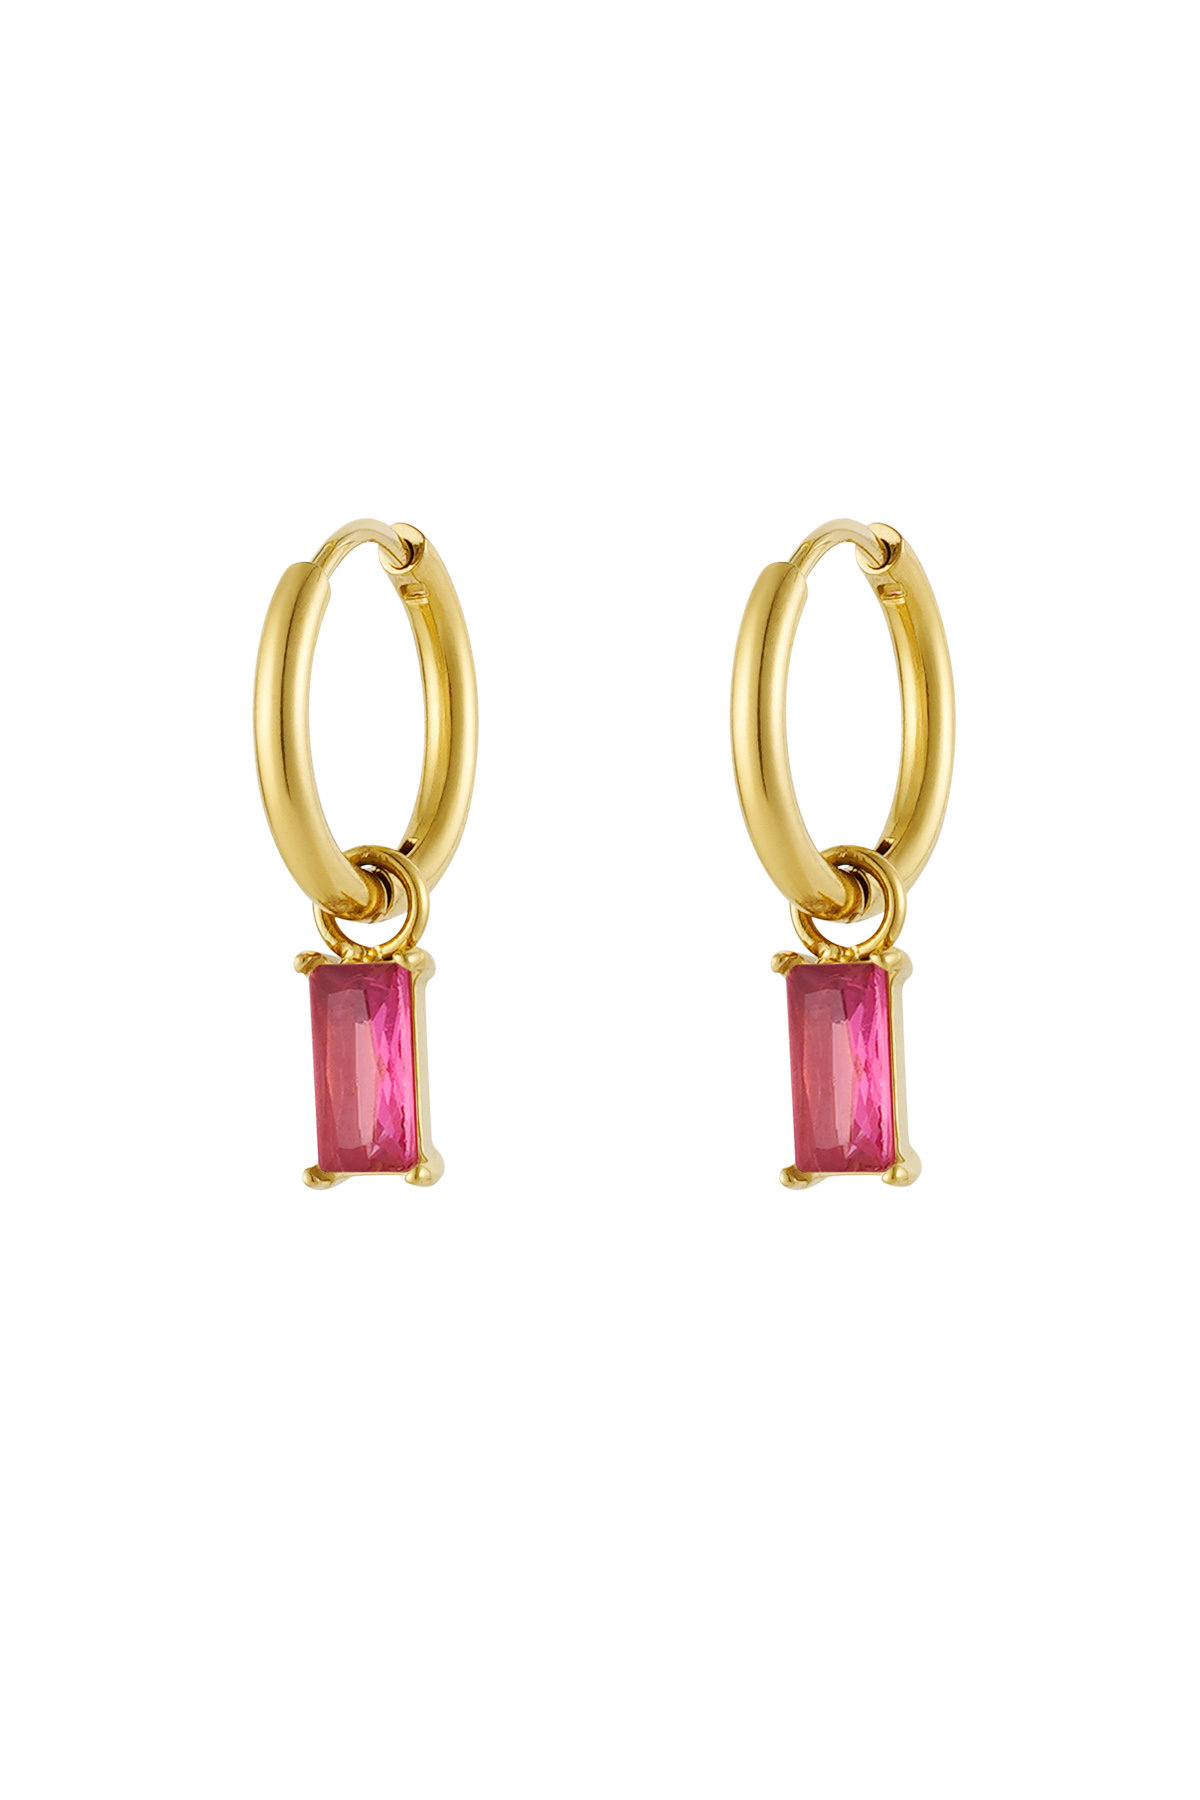 Earrings elongated stone - gold/pink h5 